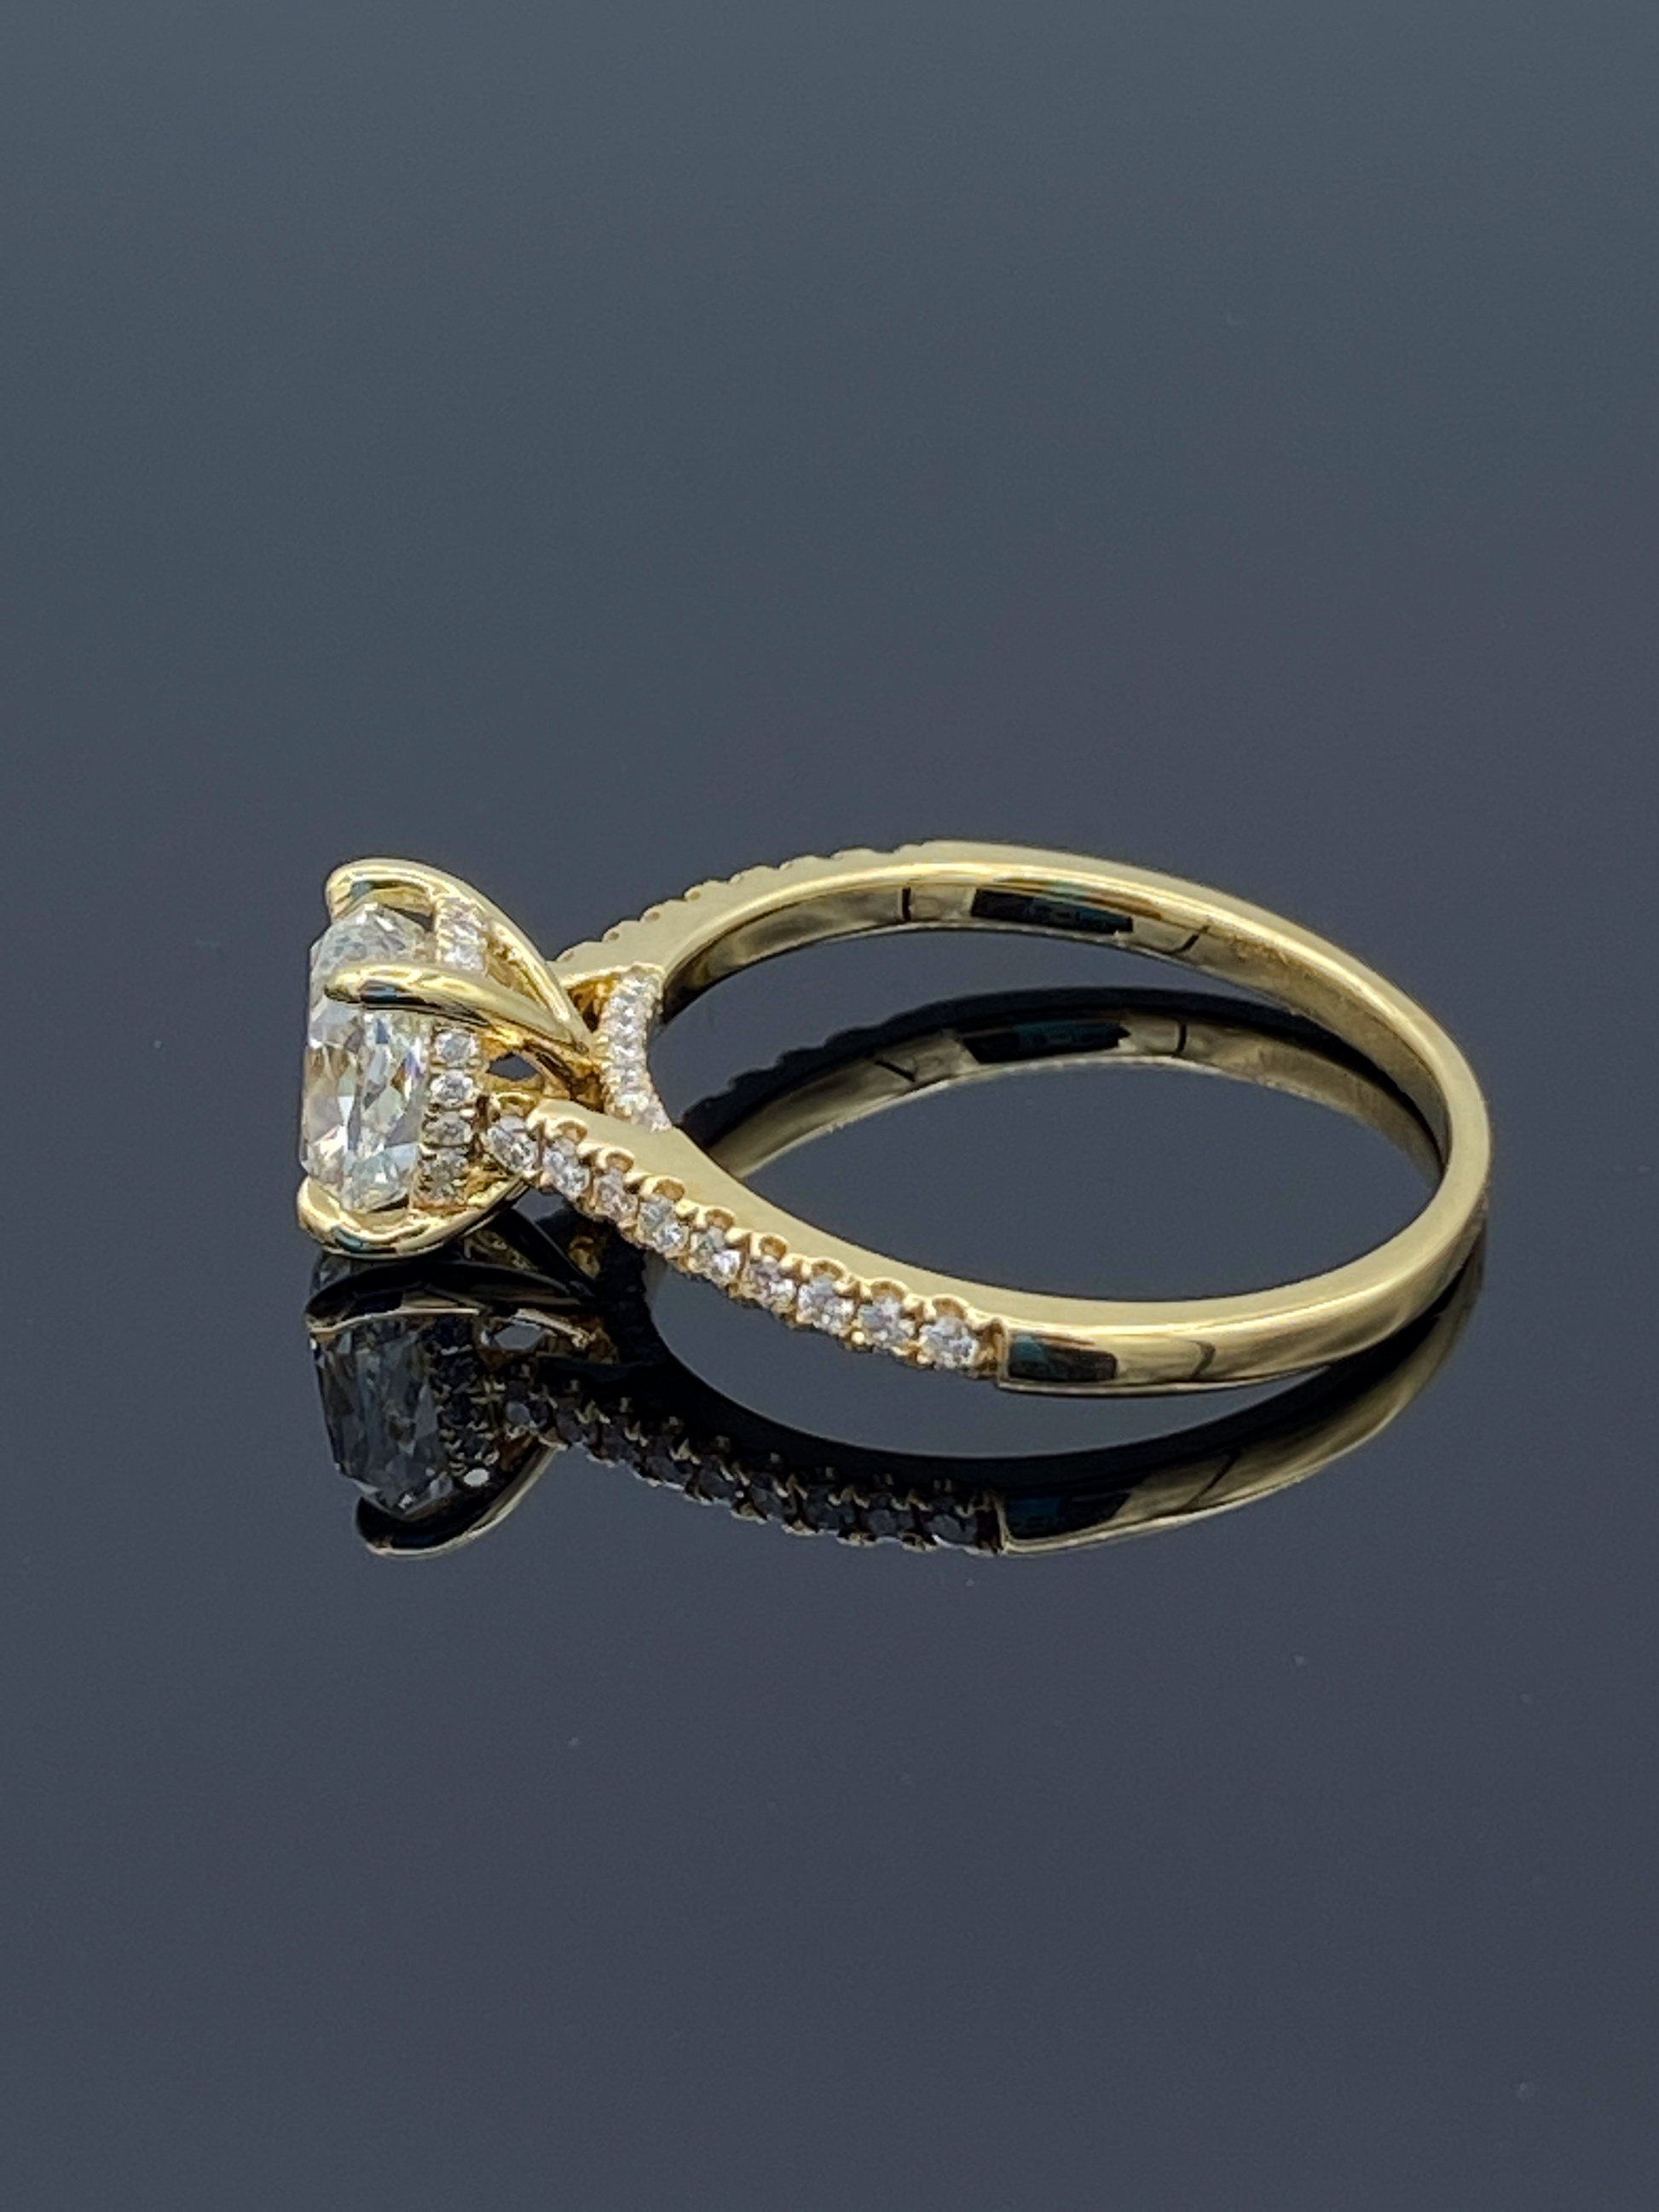 Cushion-Cut Prong Setting Diamond Engagement Ring in 18K Yellow Gold - L and L Jewelry